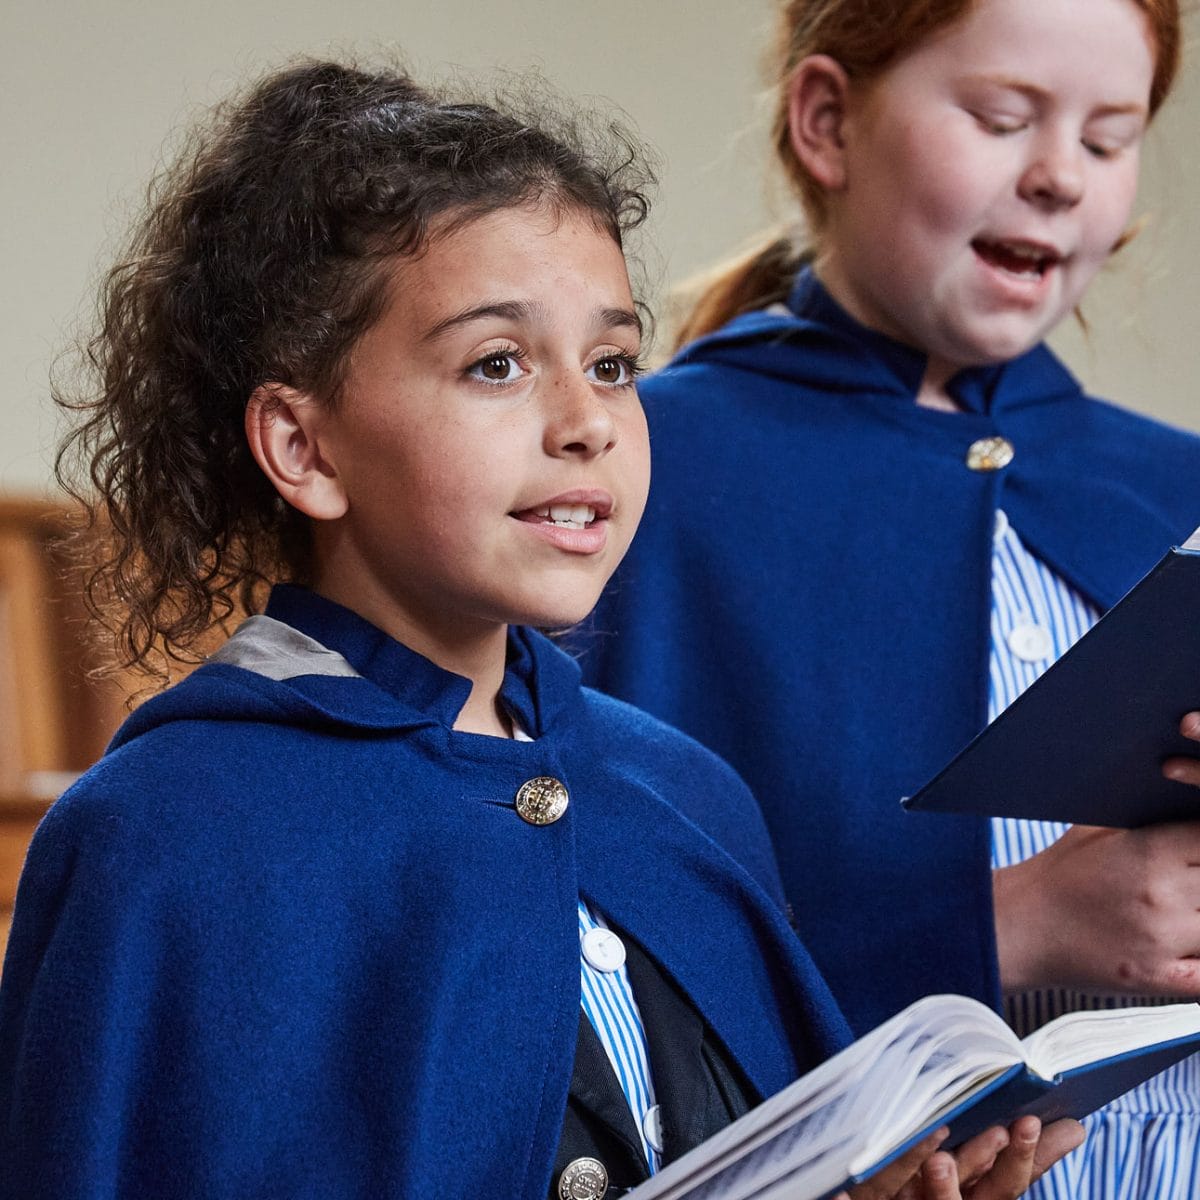 A girl singing from a hymn book in The Blue Coat School Chapel.